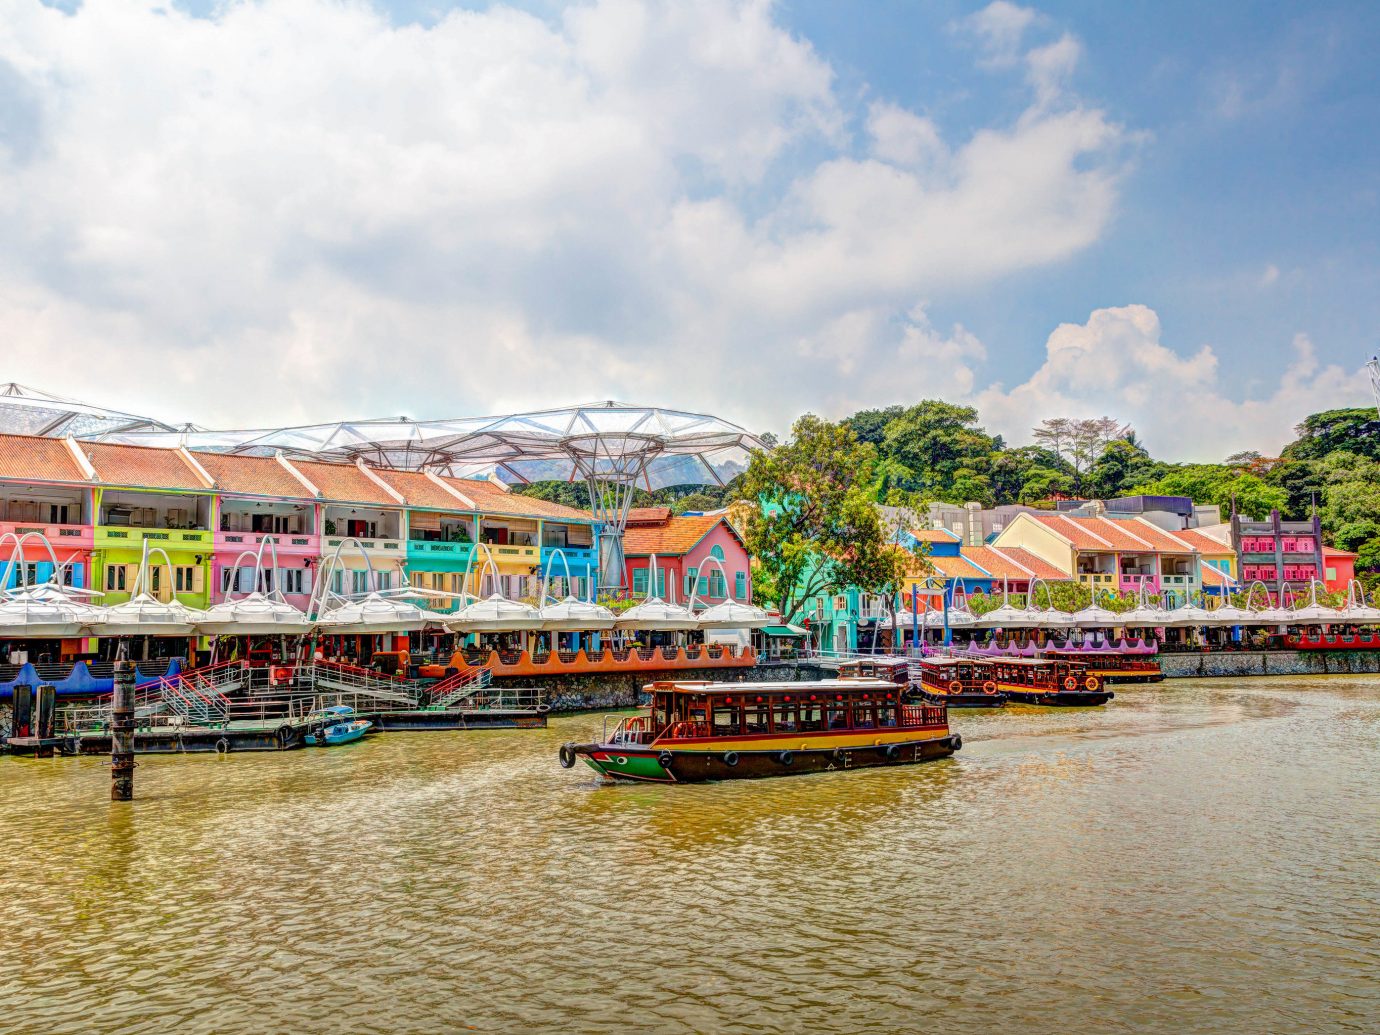 Offbeat Singapore Trip Ideas waterway water transportation sky water leisure Boat reflection tourist attraction tree River tourism City plant Resort recreation Canal landscape Lake boating